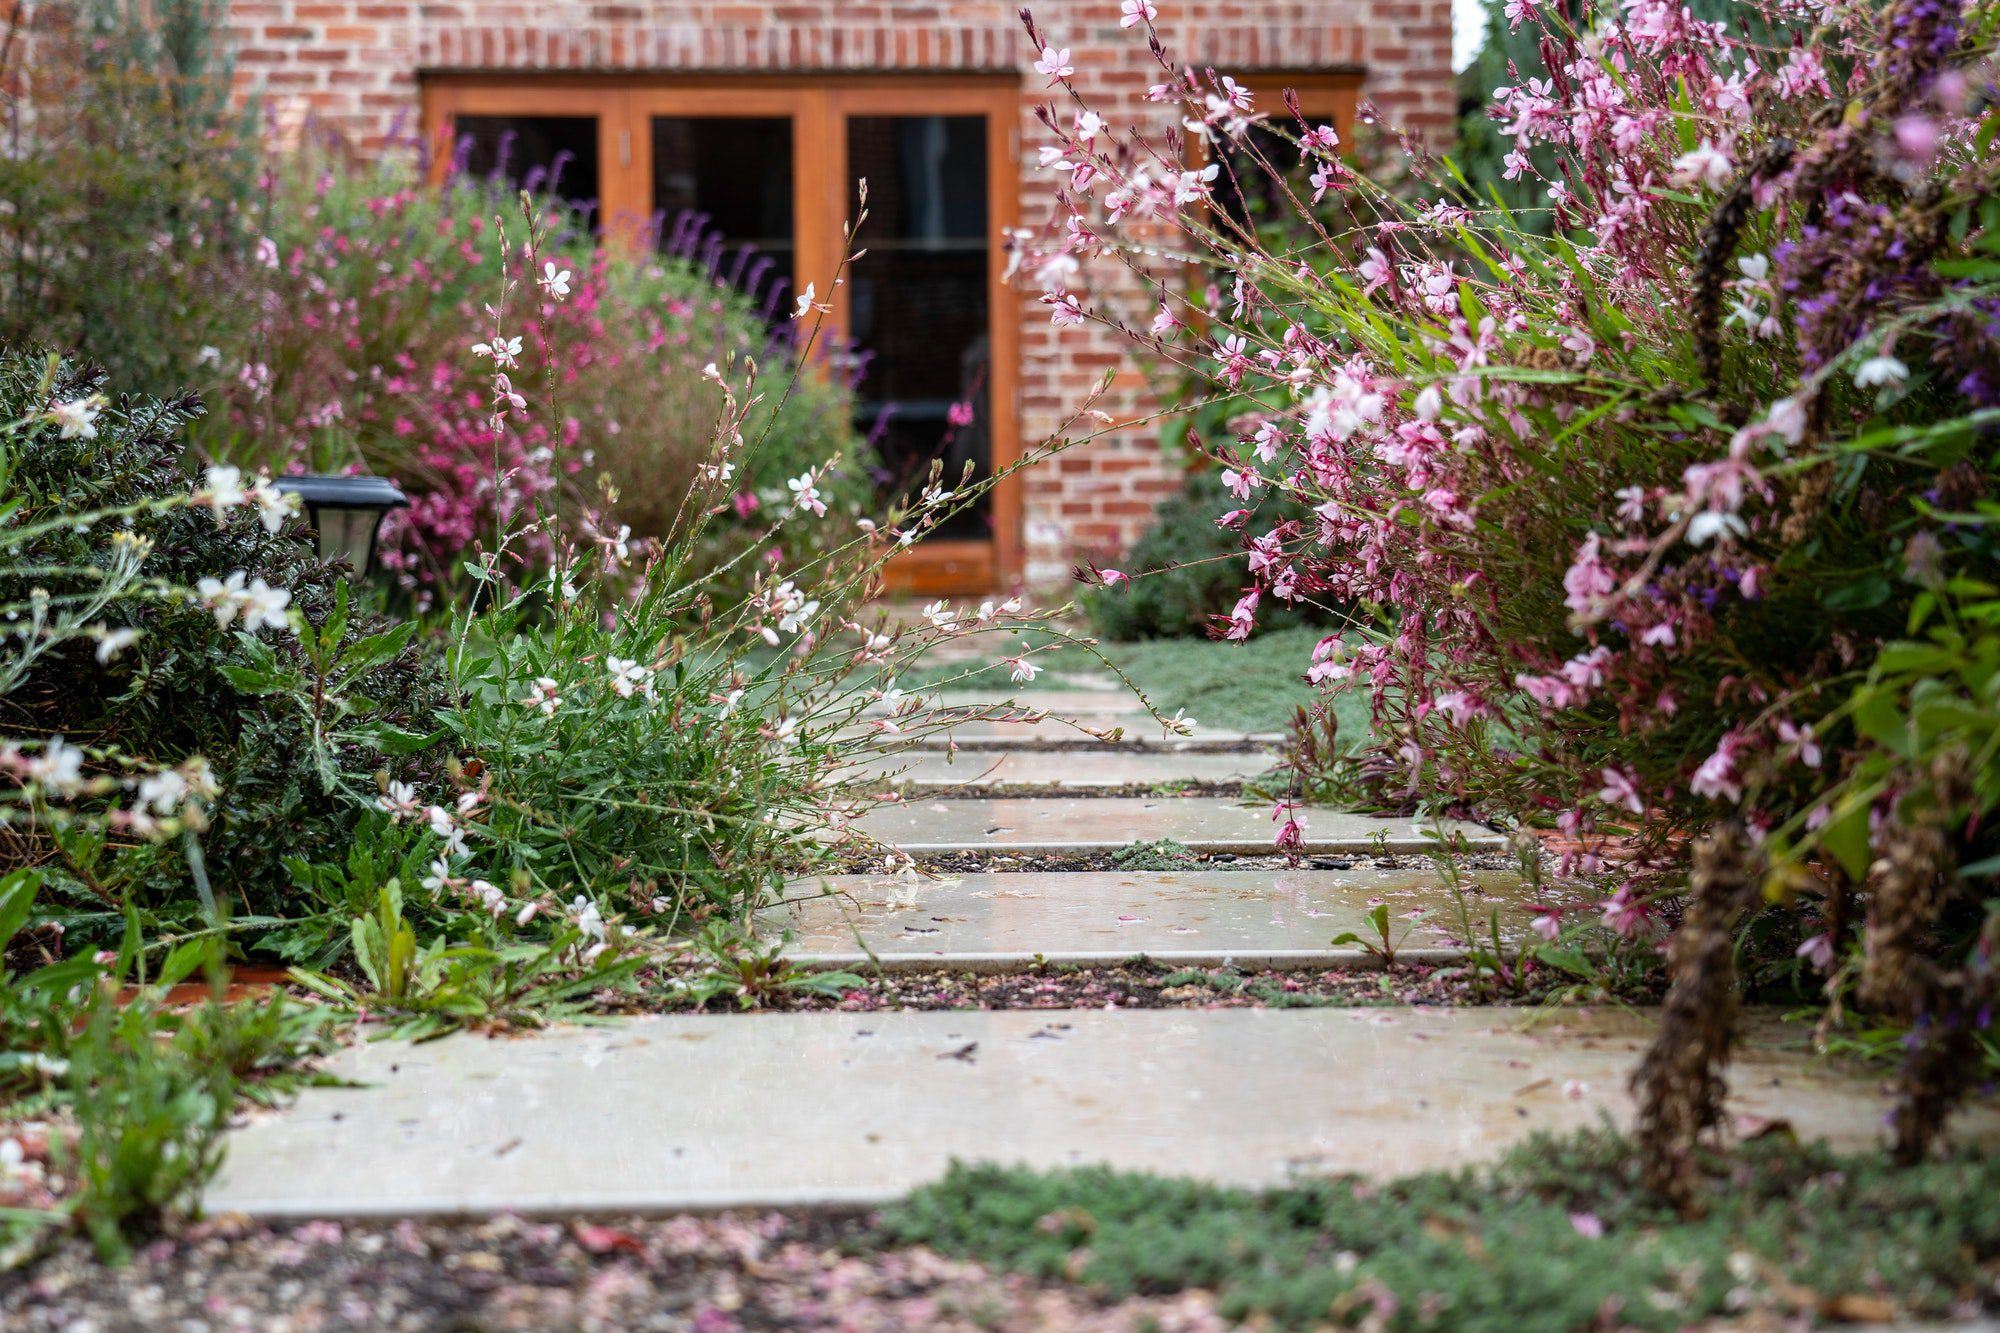 pavers in blossoming garden, filled with shrubs & flowers still wet from the rain